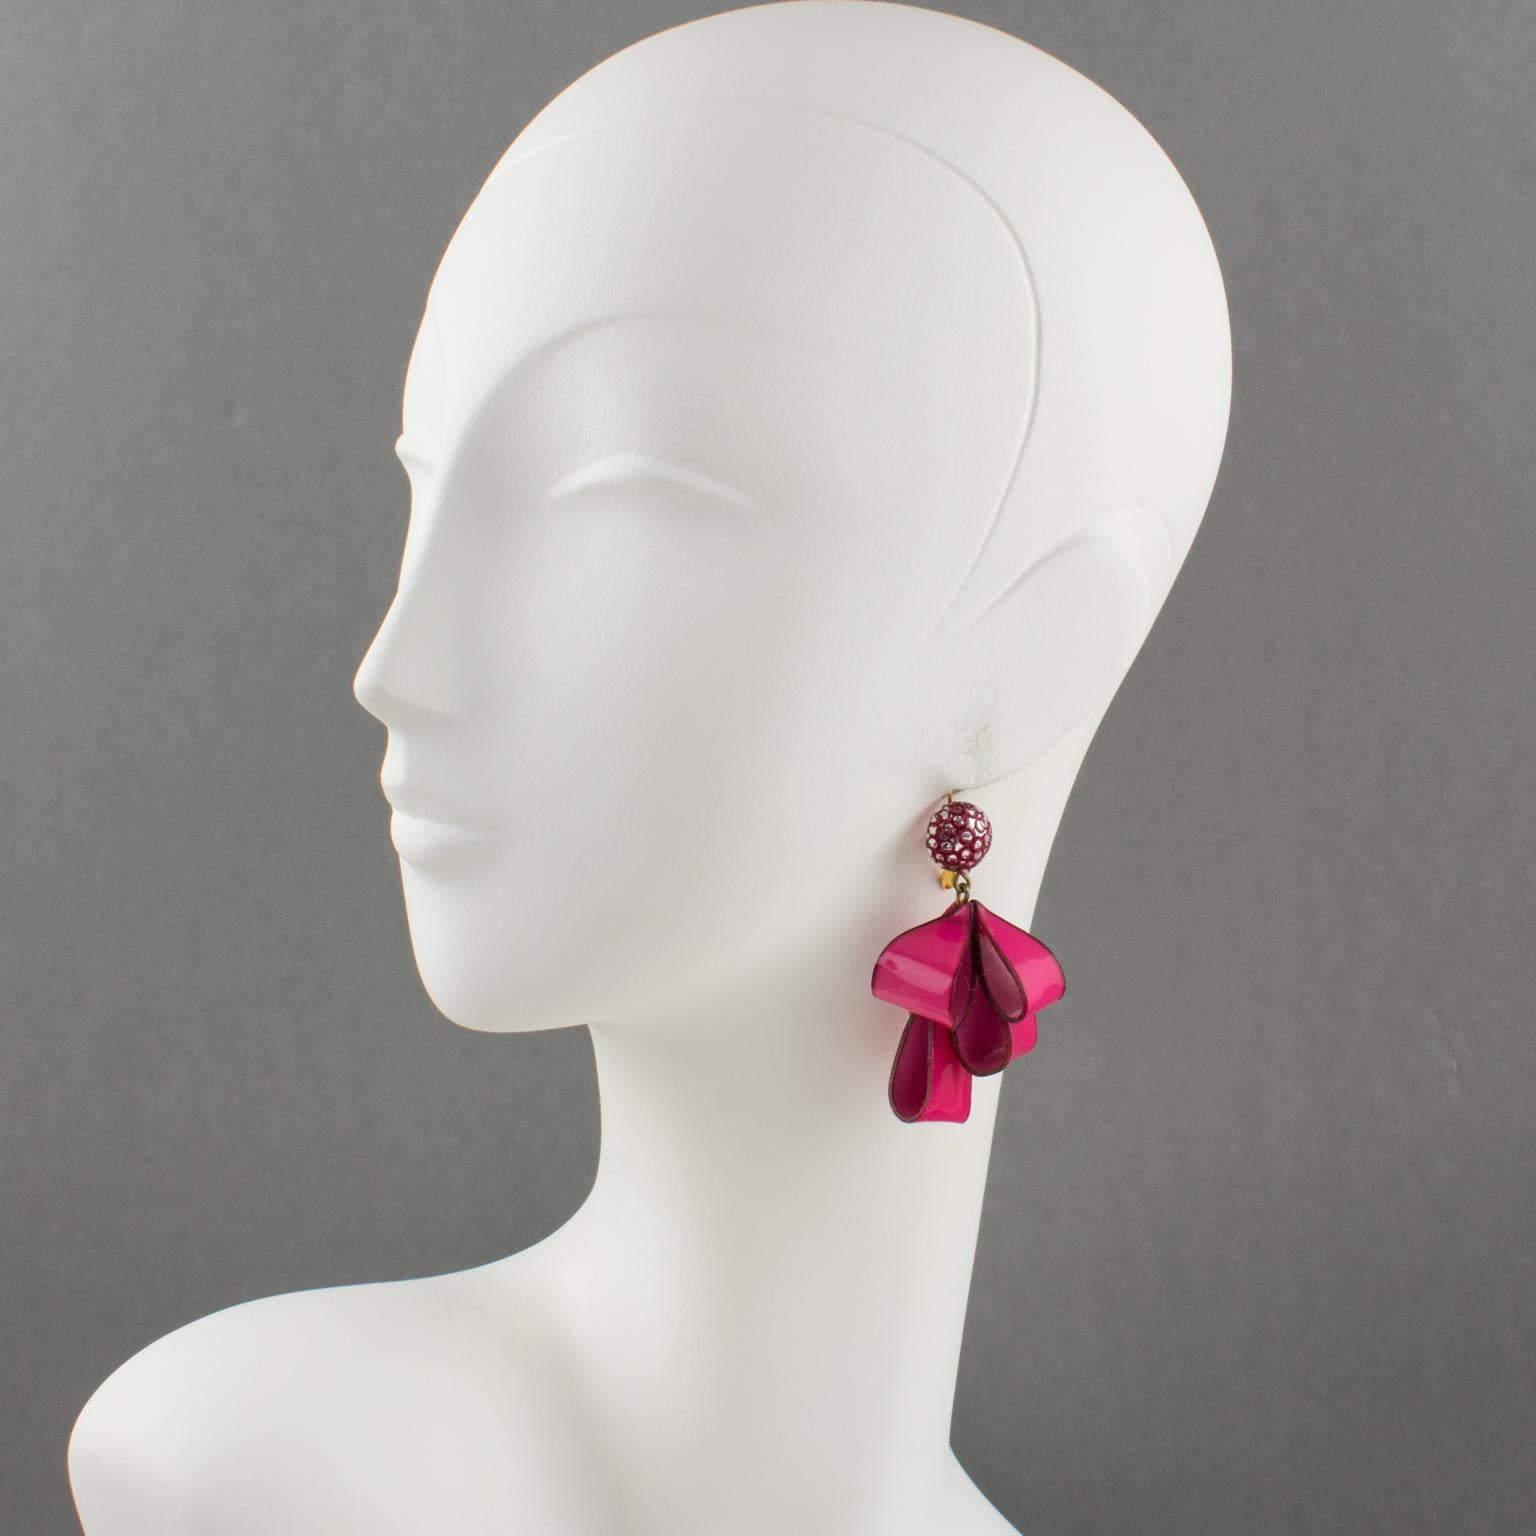 Adorable dimensional dangling pierced earrings by Cilea Paris. Hand-made artisanal resin or Talosel earrings featuring dimensional ribbon with textured patterns build together to form a powerful statement piece. Very nice vivid hot pink and silver